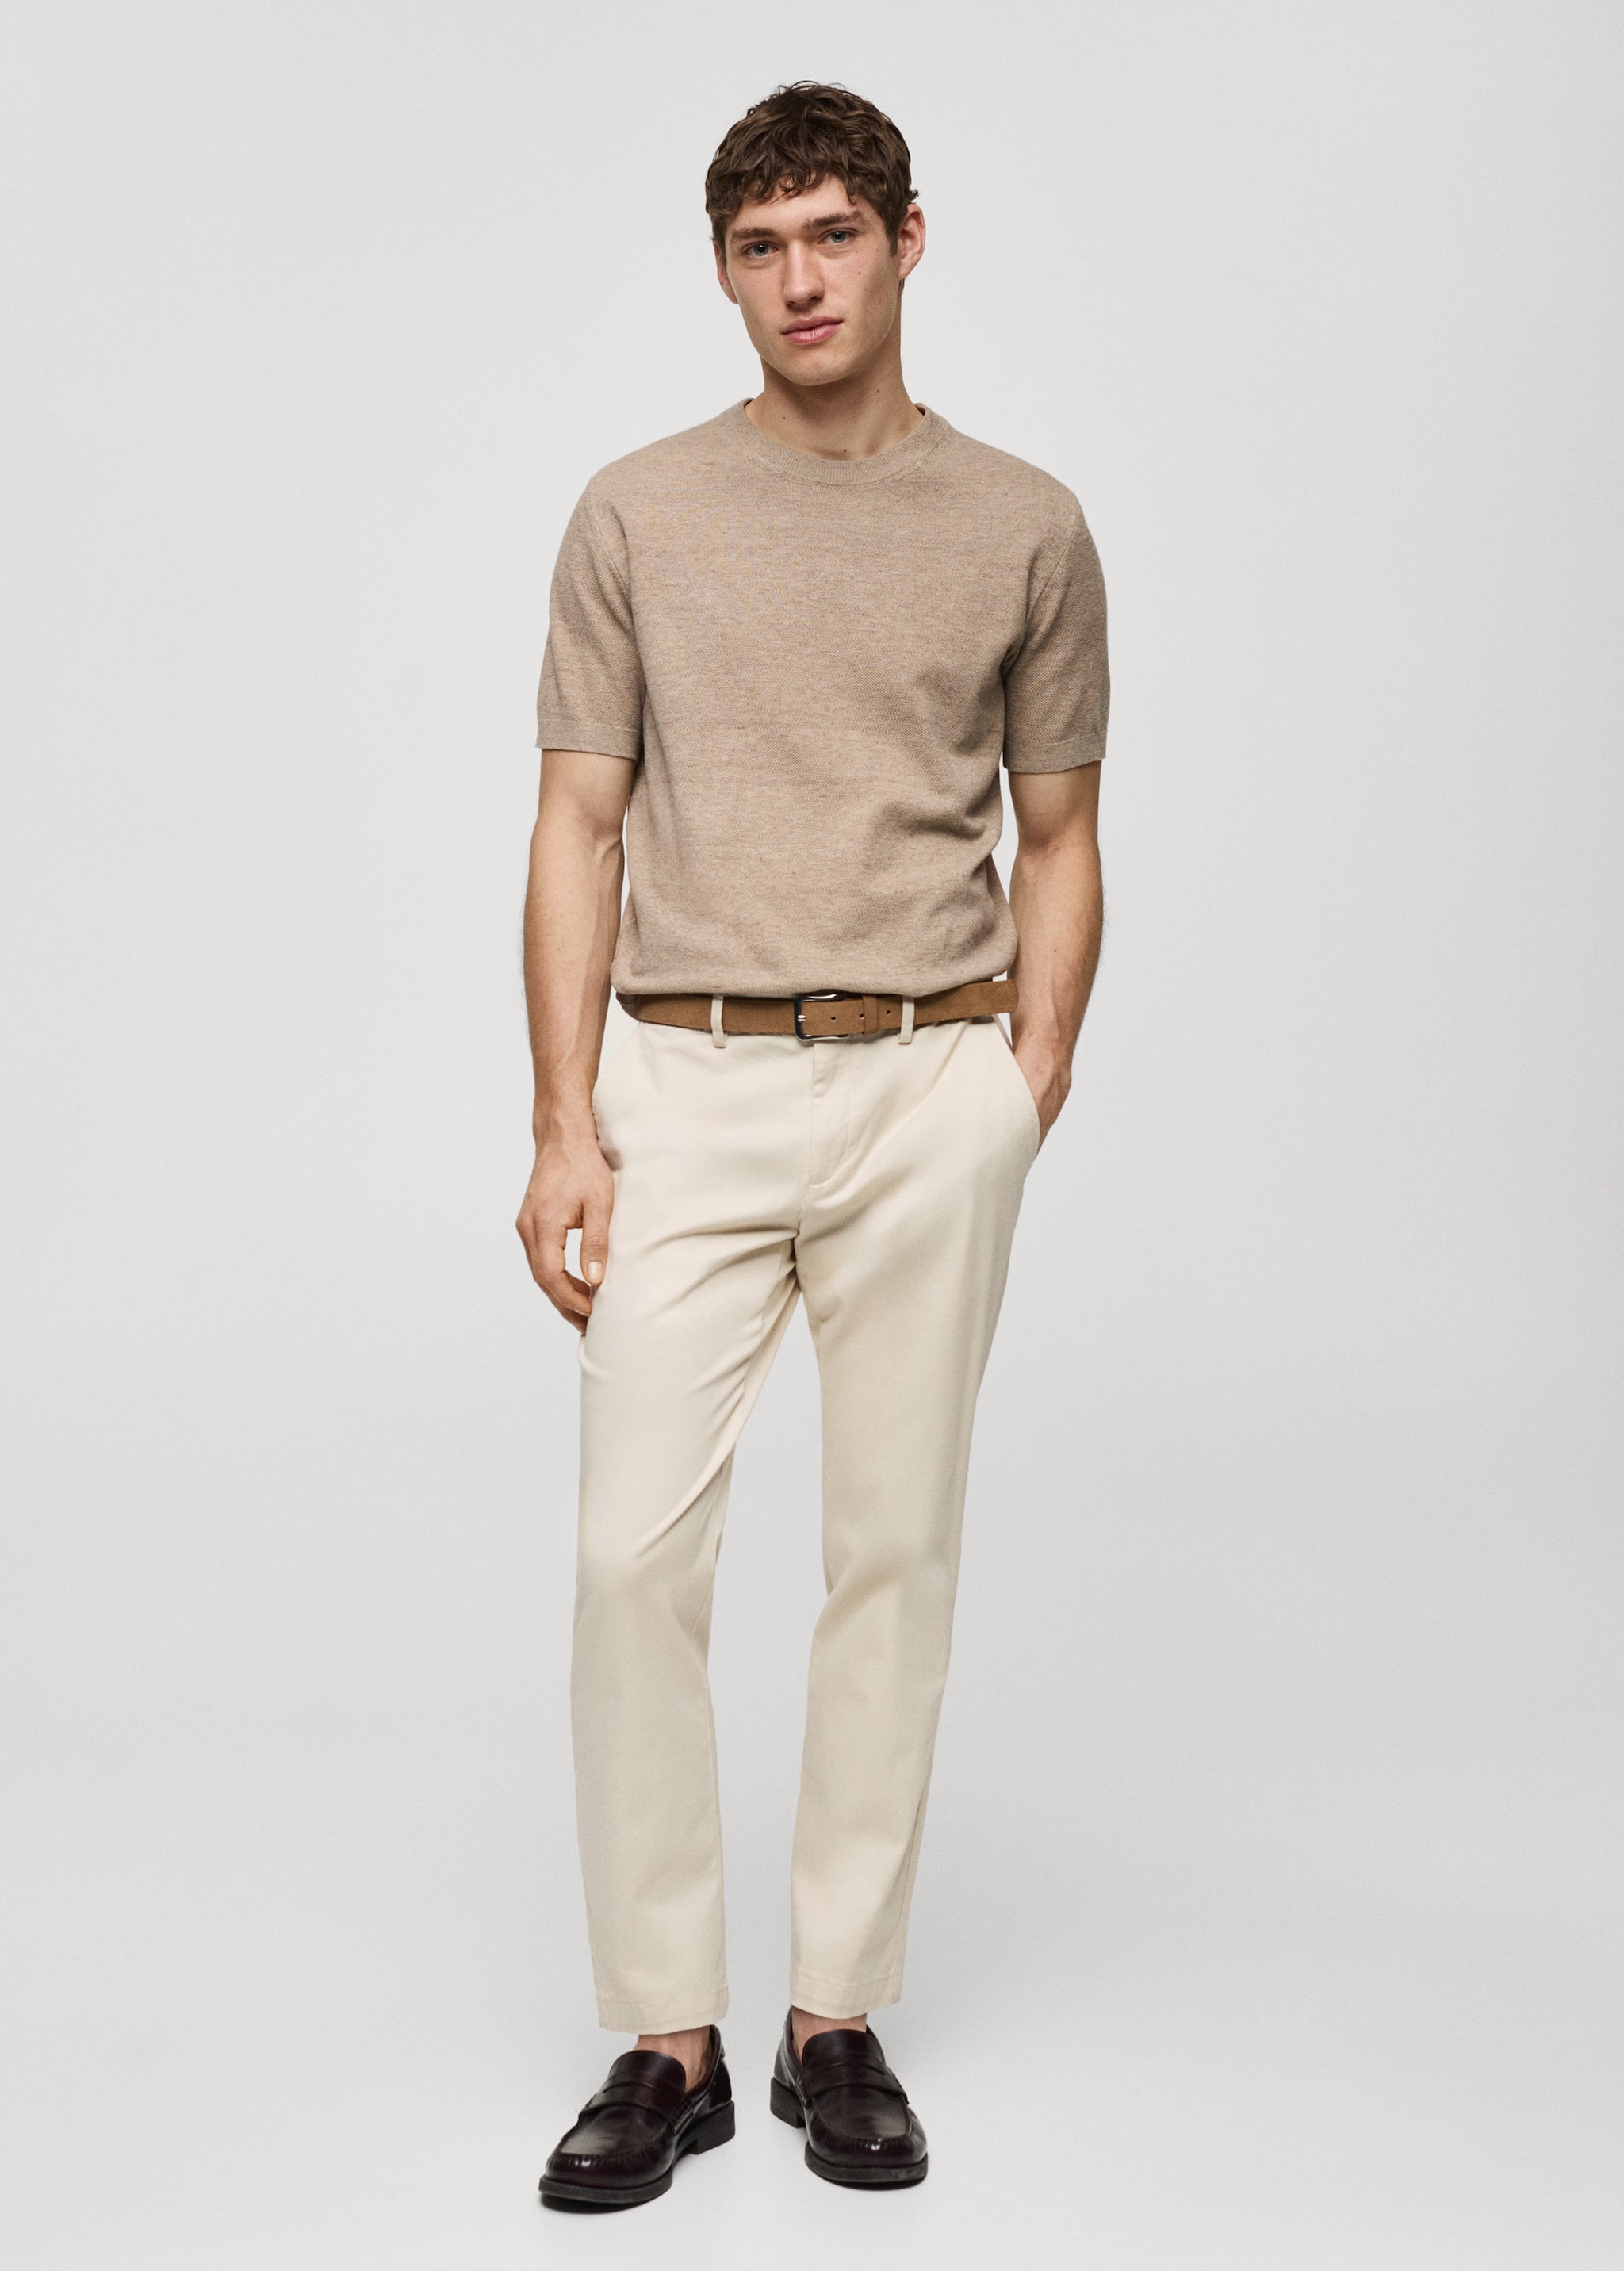 Cotton tapered crop pants - General plane